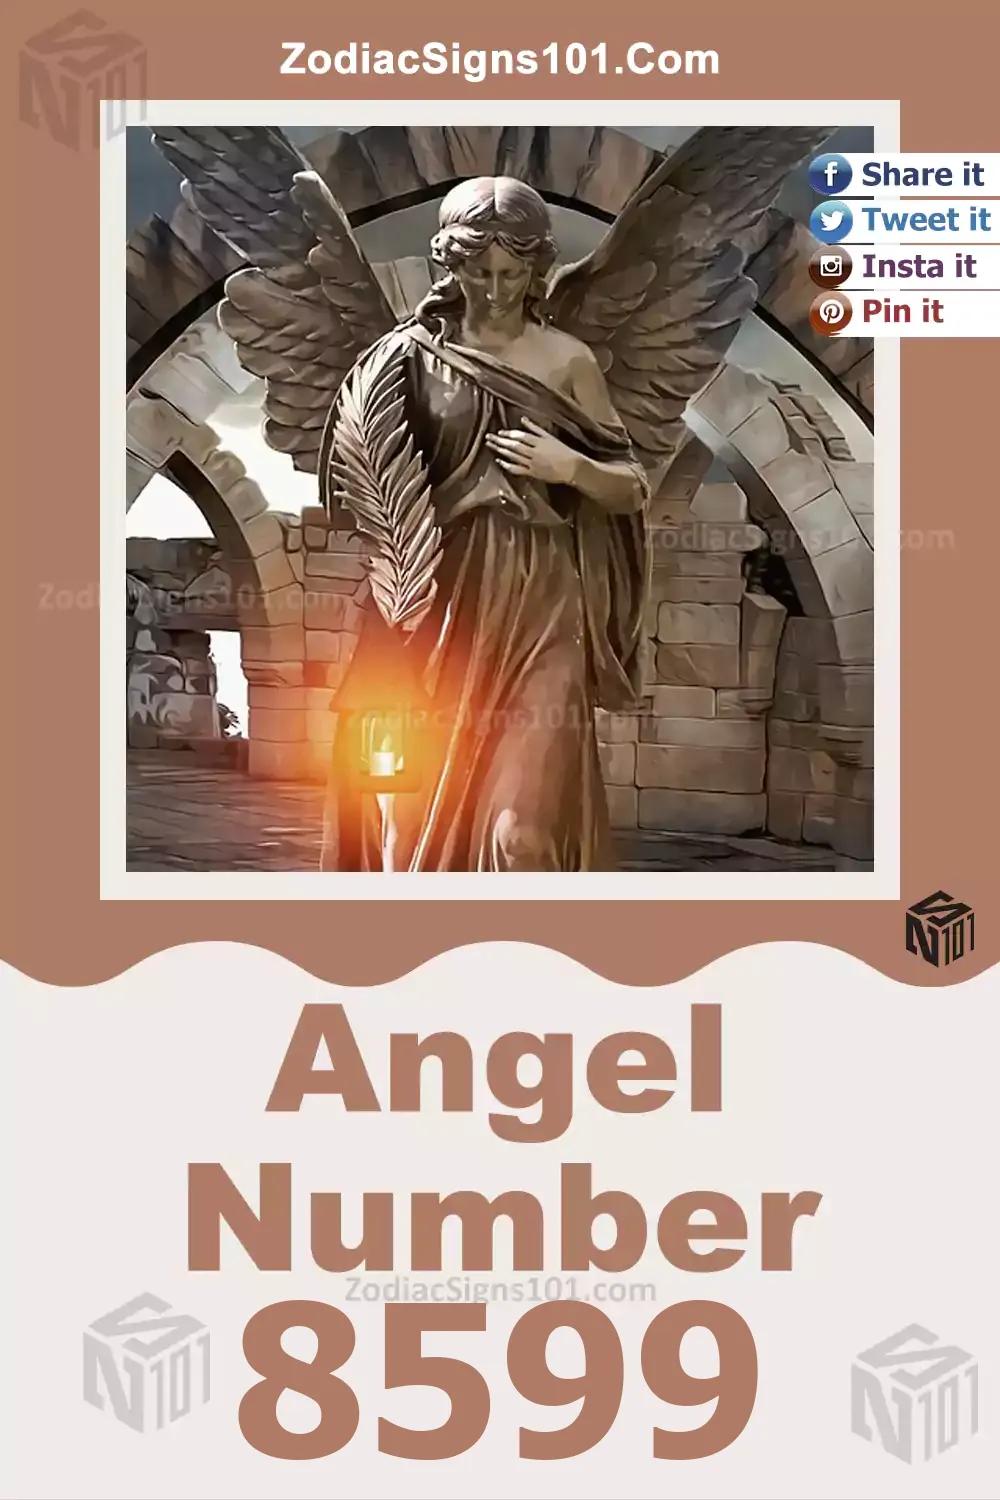 8599 Angel Number Meaning